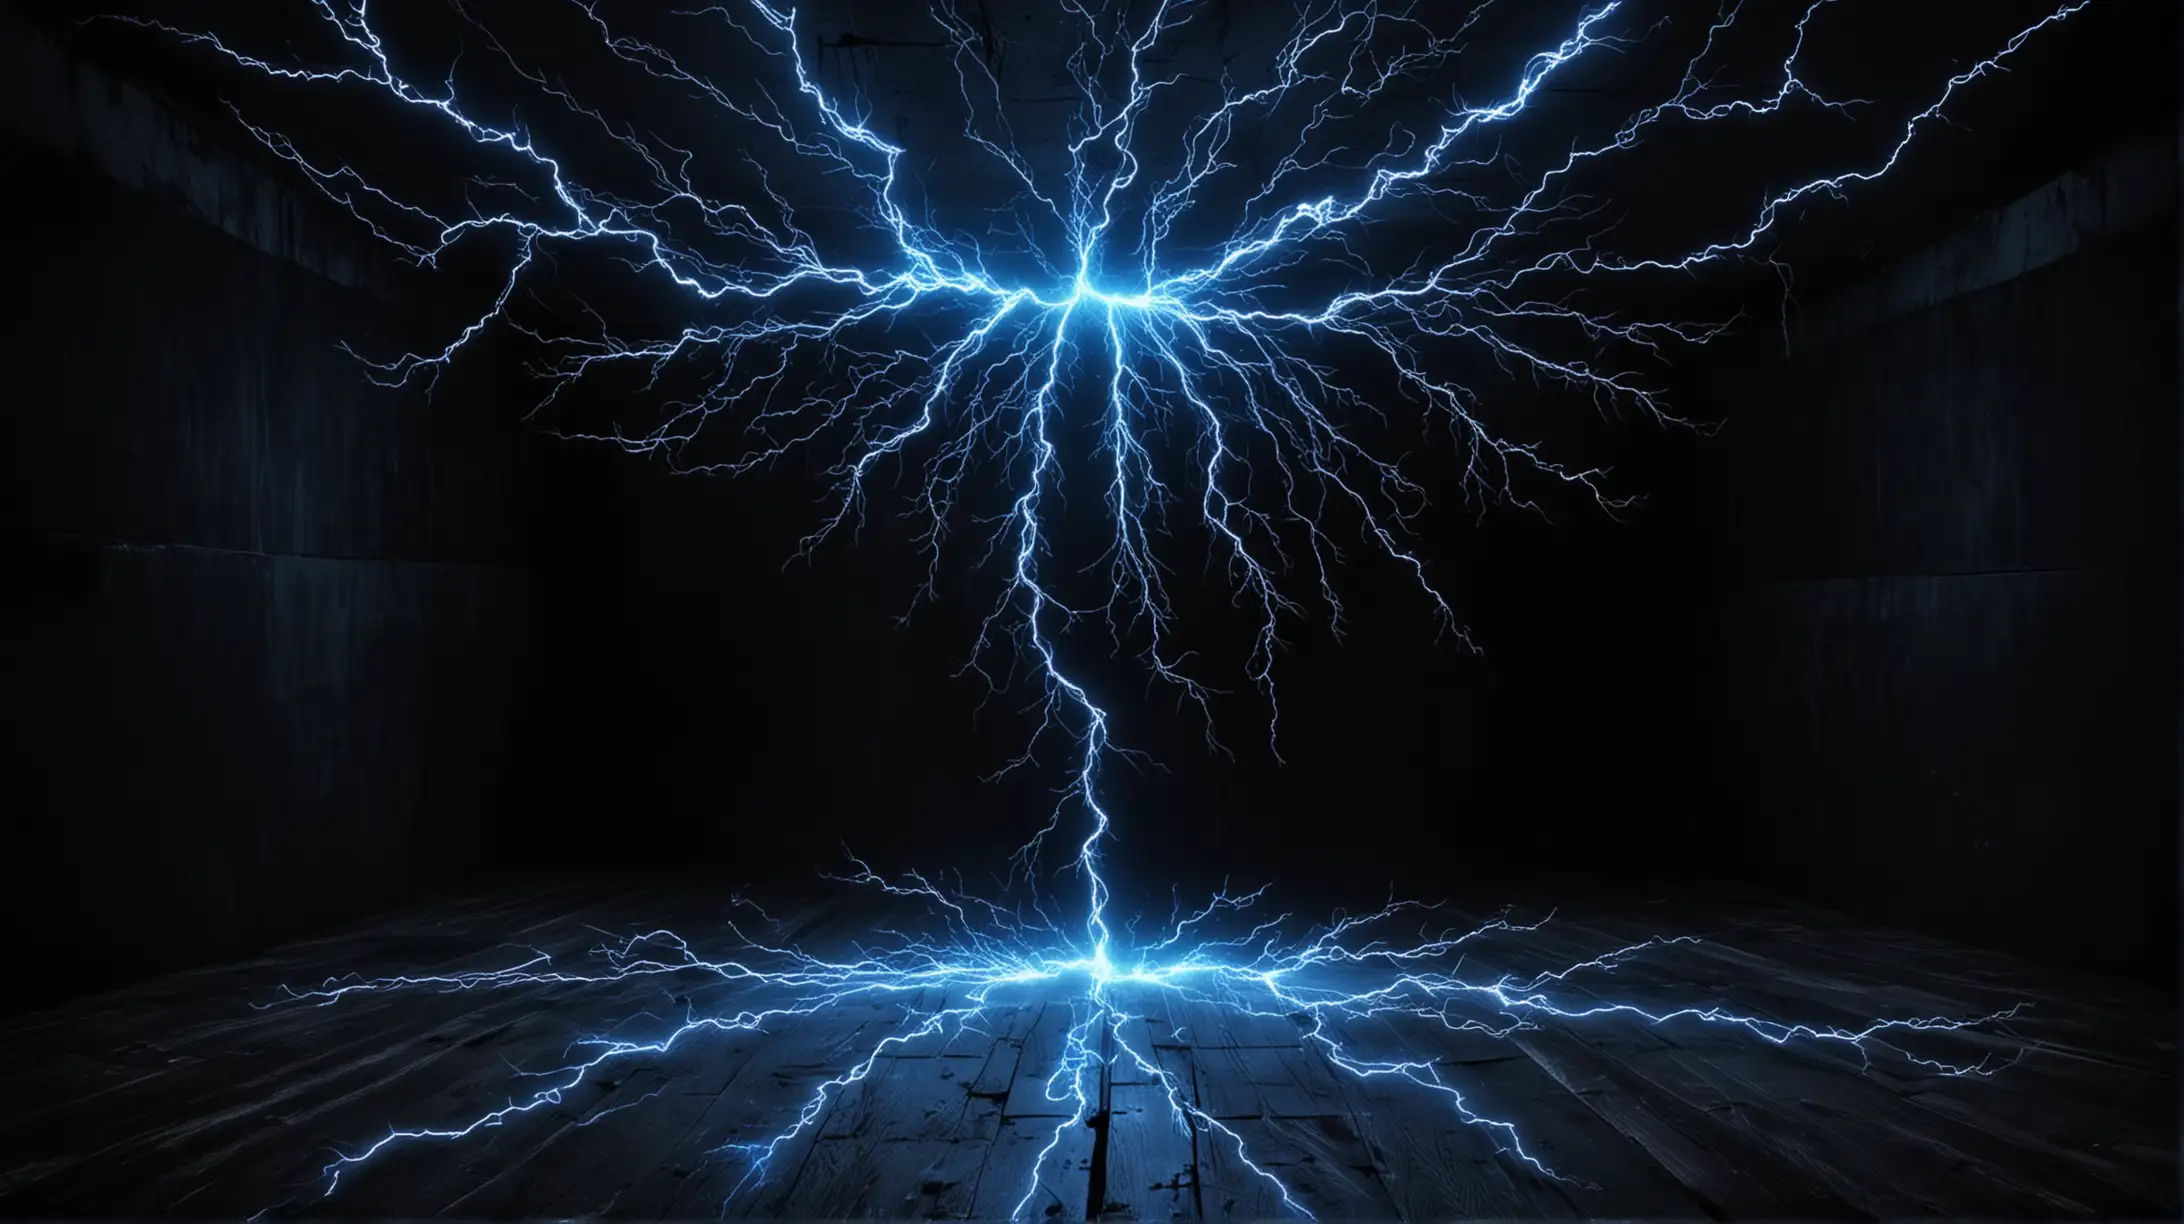 Neon Blue Lightning Bolts in Extreme Perspective on Black Background